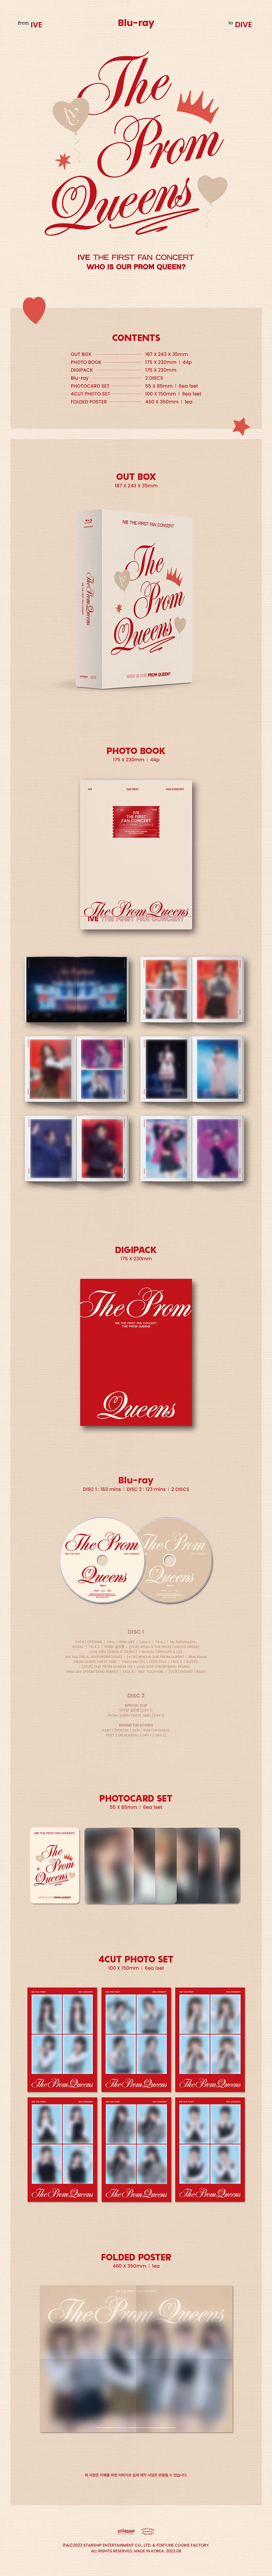 ( Blu ray) IVE - THE FIRST FAN CONCERT [The Prom Queens] IVE_dvd IVE_kit IVE_bluray IVE_fancon The_Prom_Queens